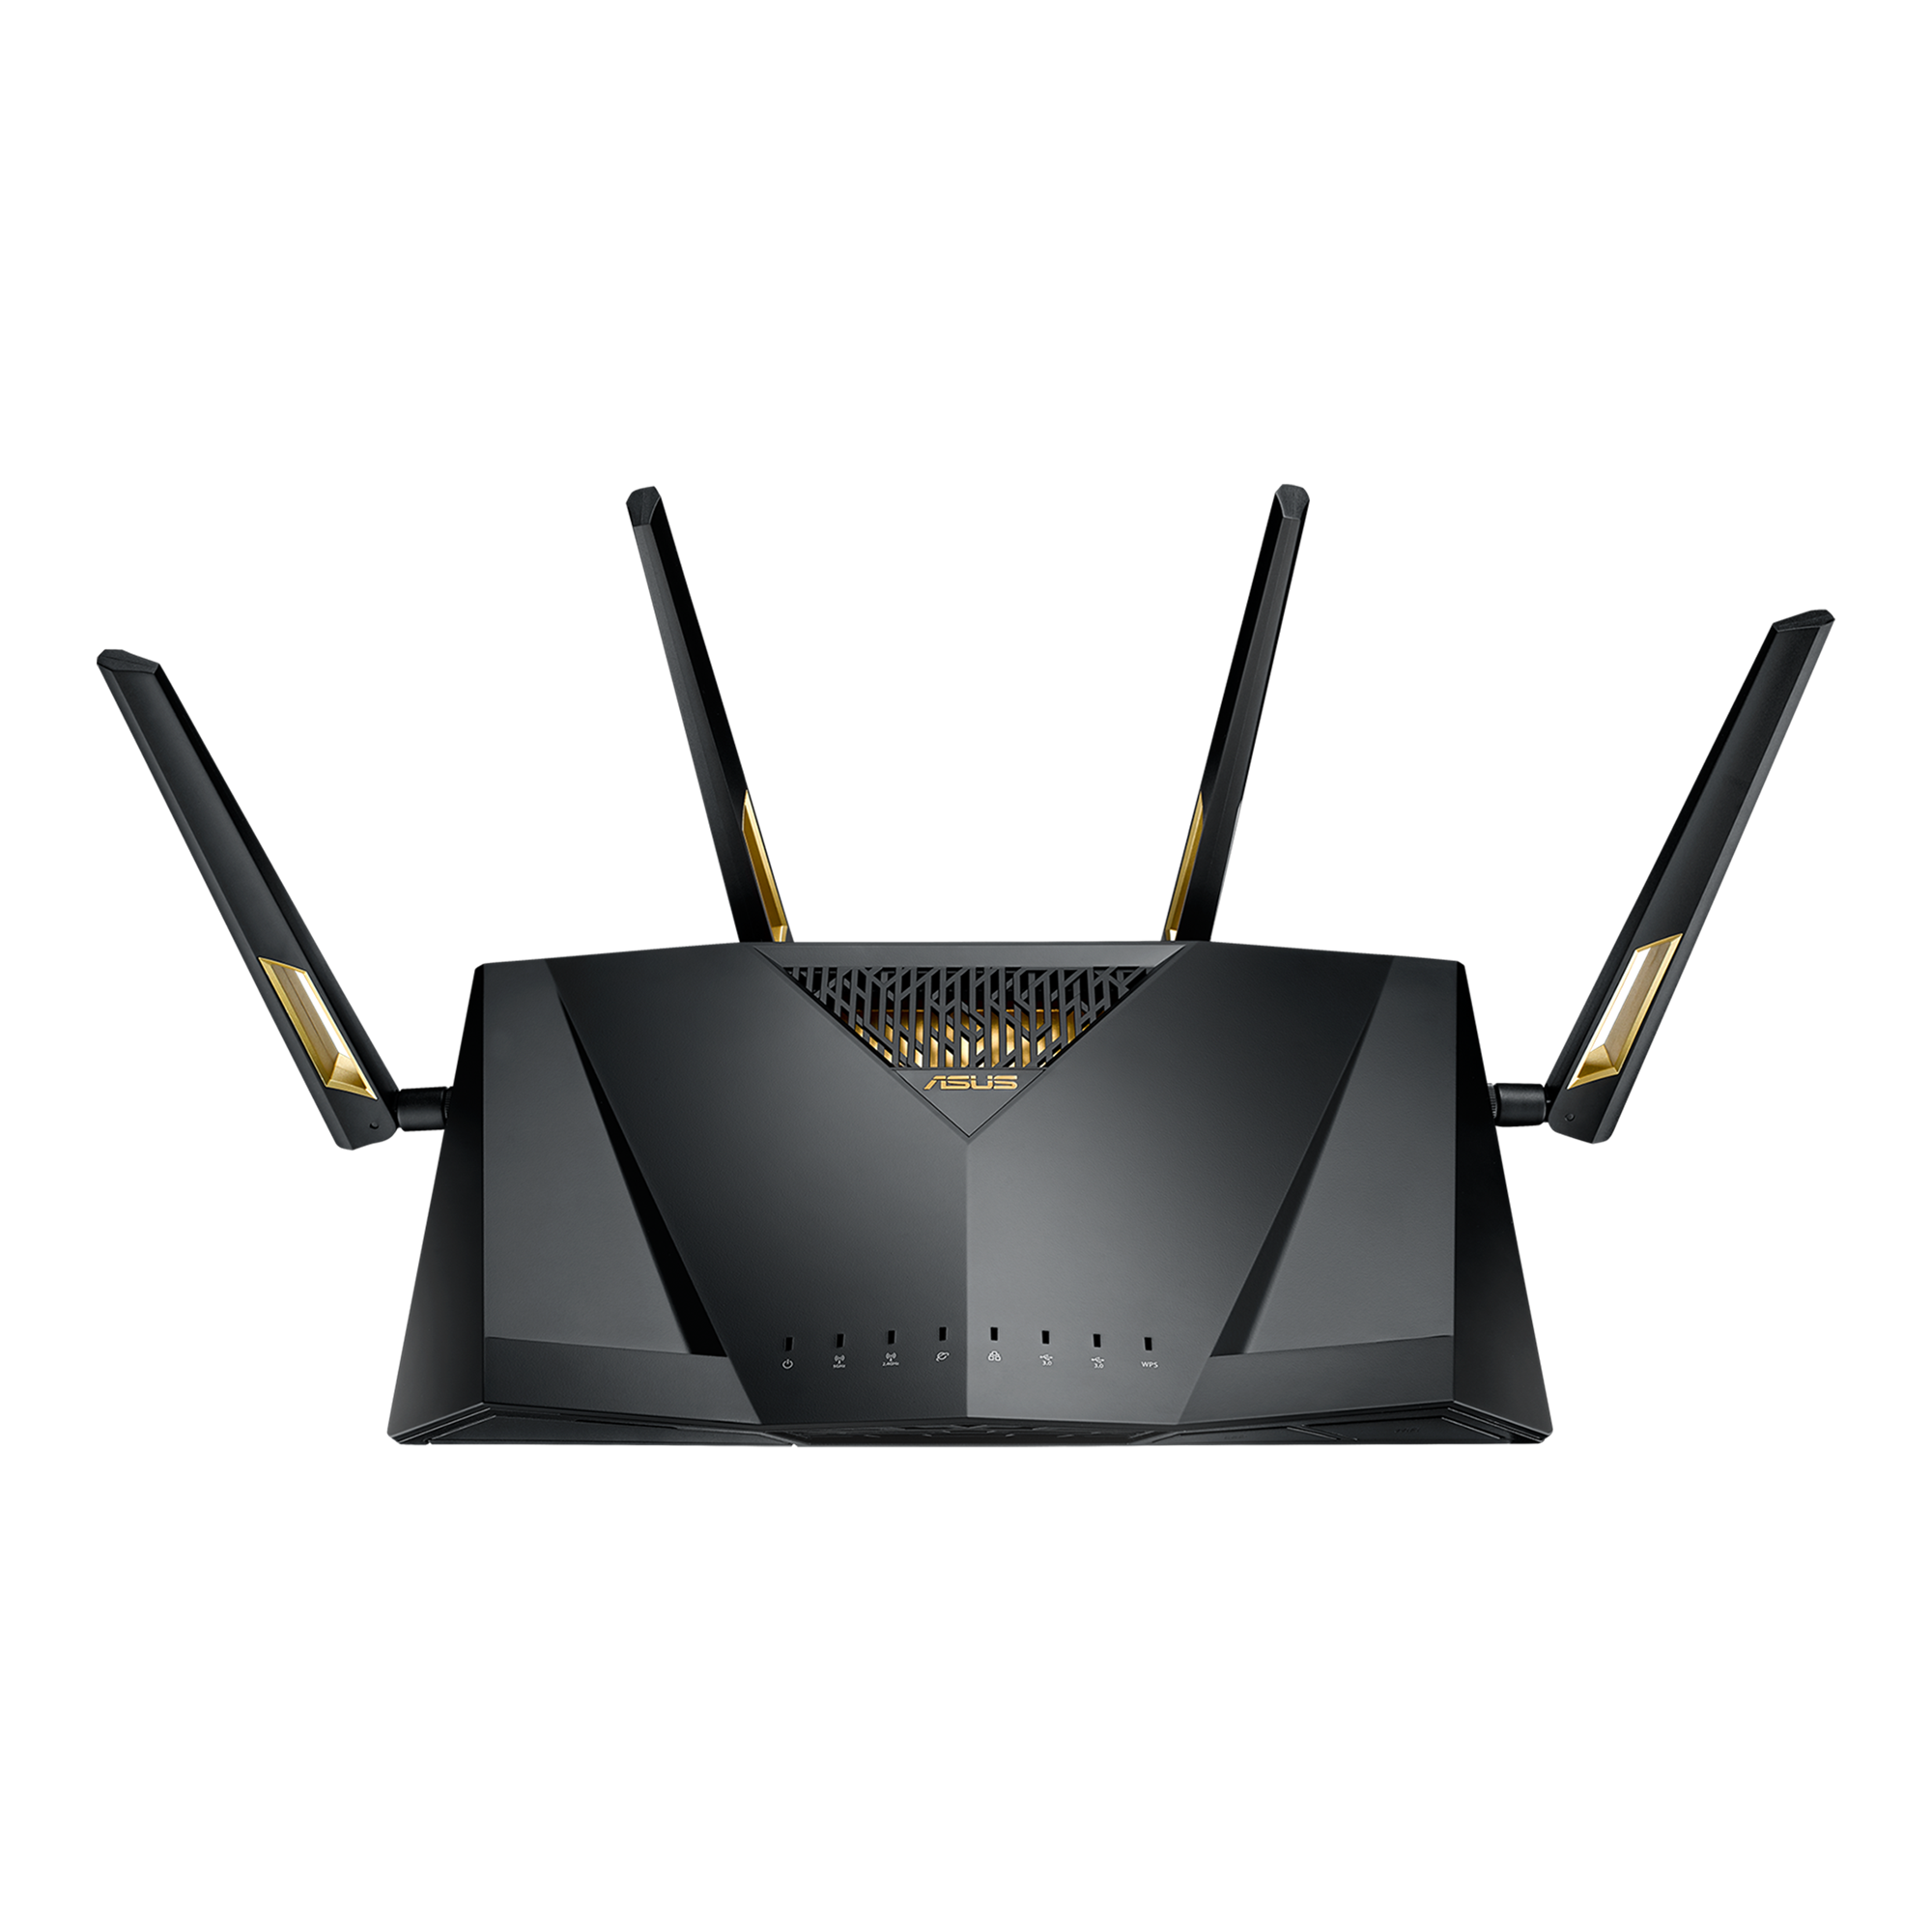 Rt Axu Wifi Routers Asus Global